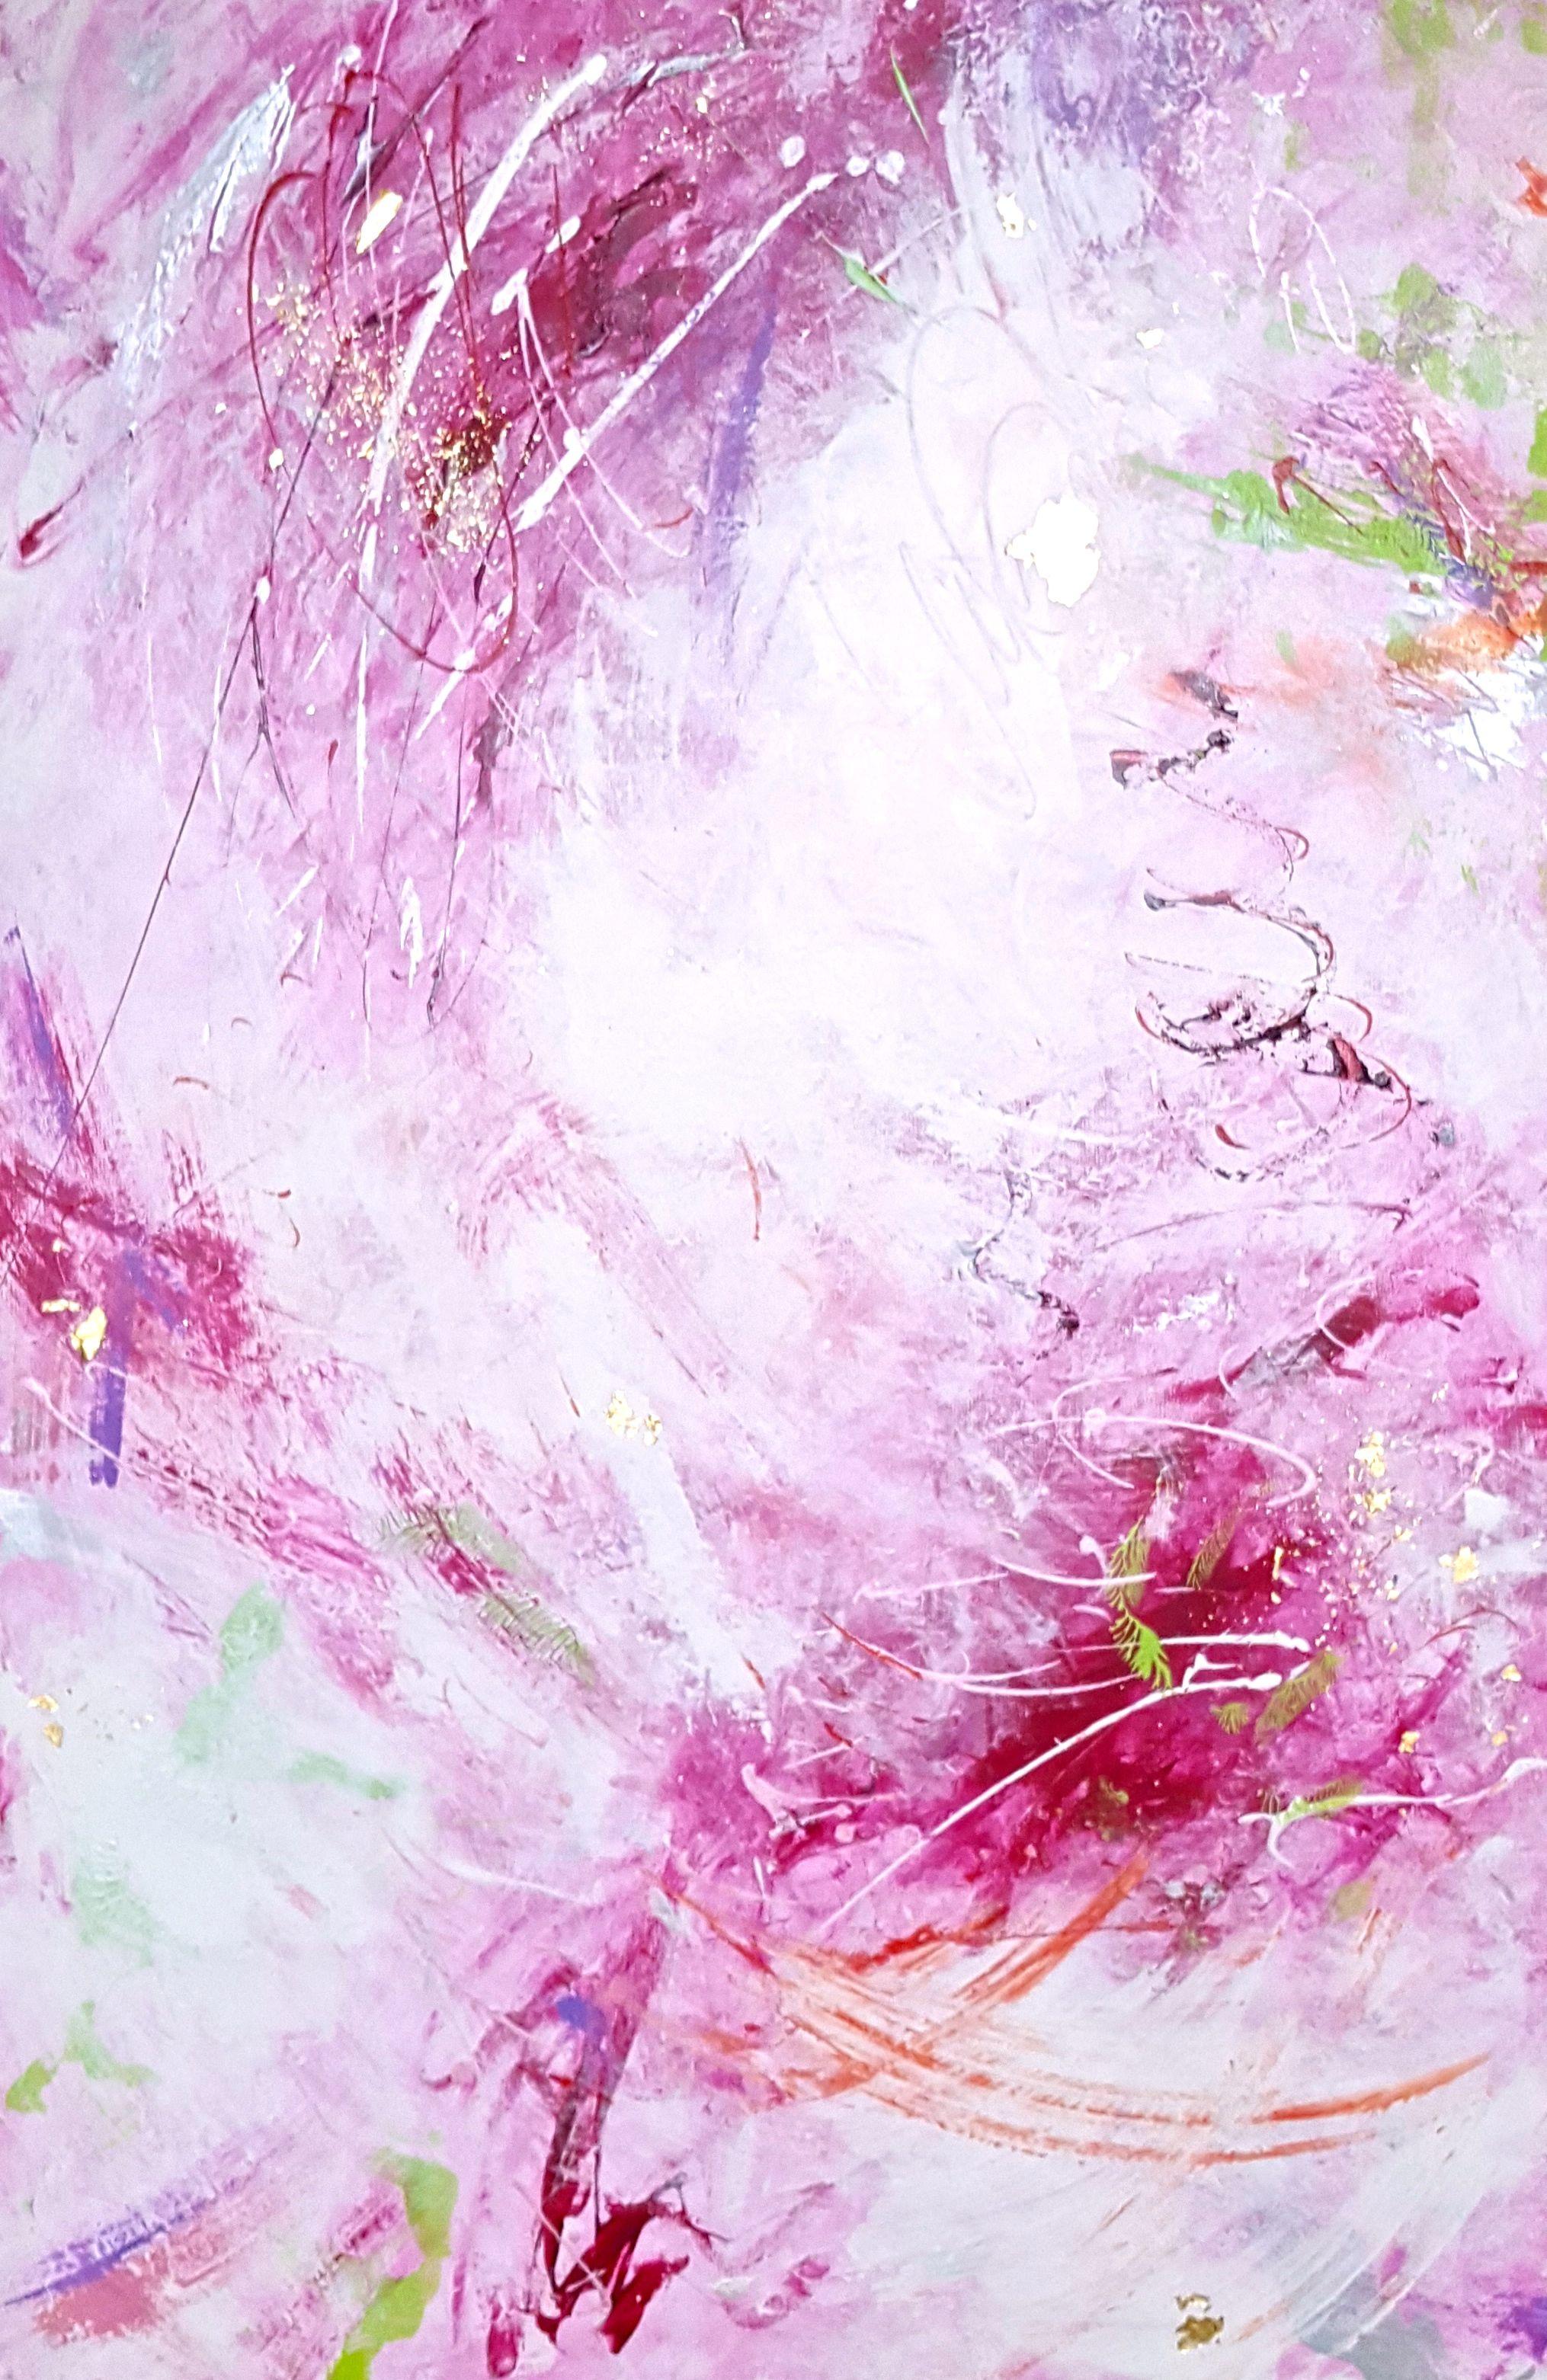 Laura Spring Abstract Painting - Feminine Vortex, Painting, Acrylic on Canvas